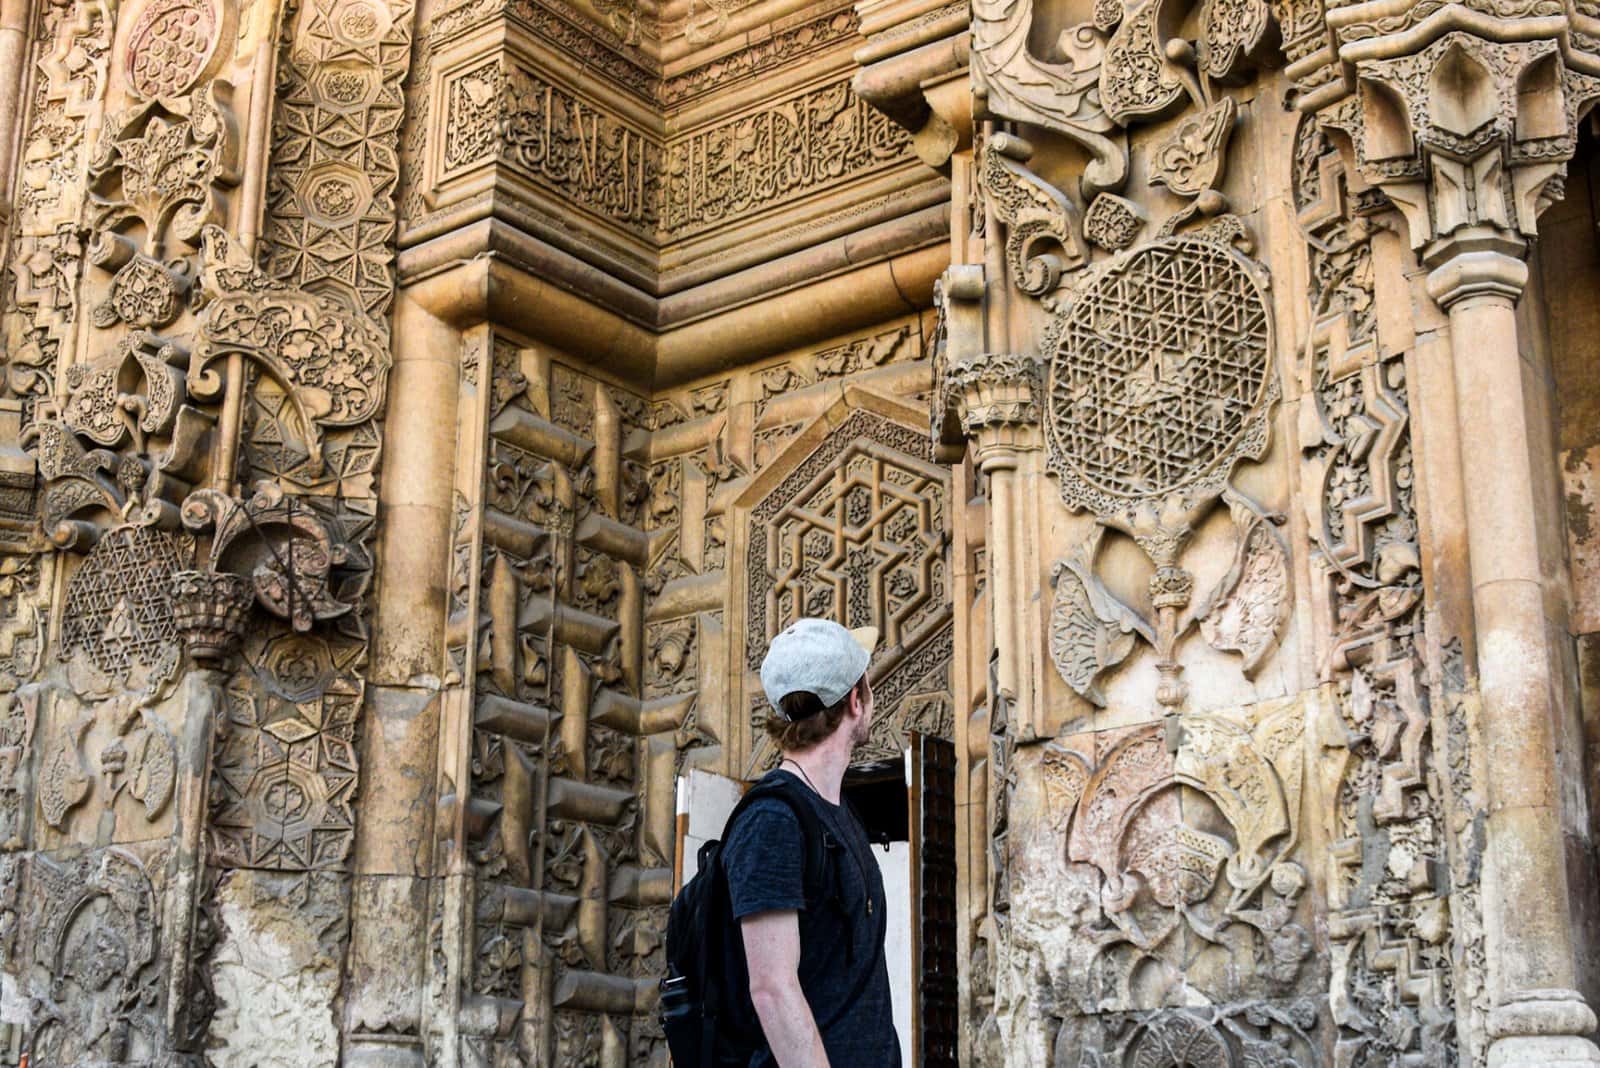 the author standing in front of the magnificent gate of the Mosque in Divrigi